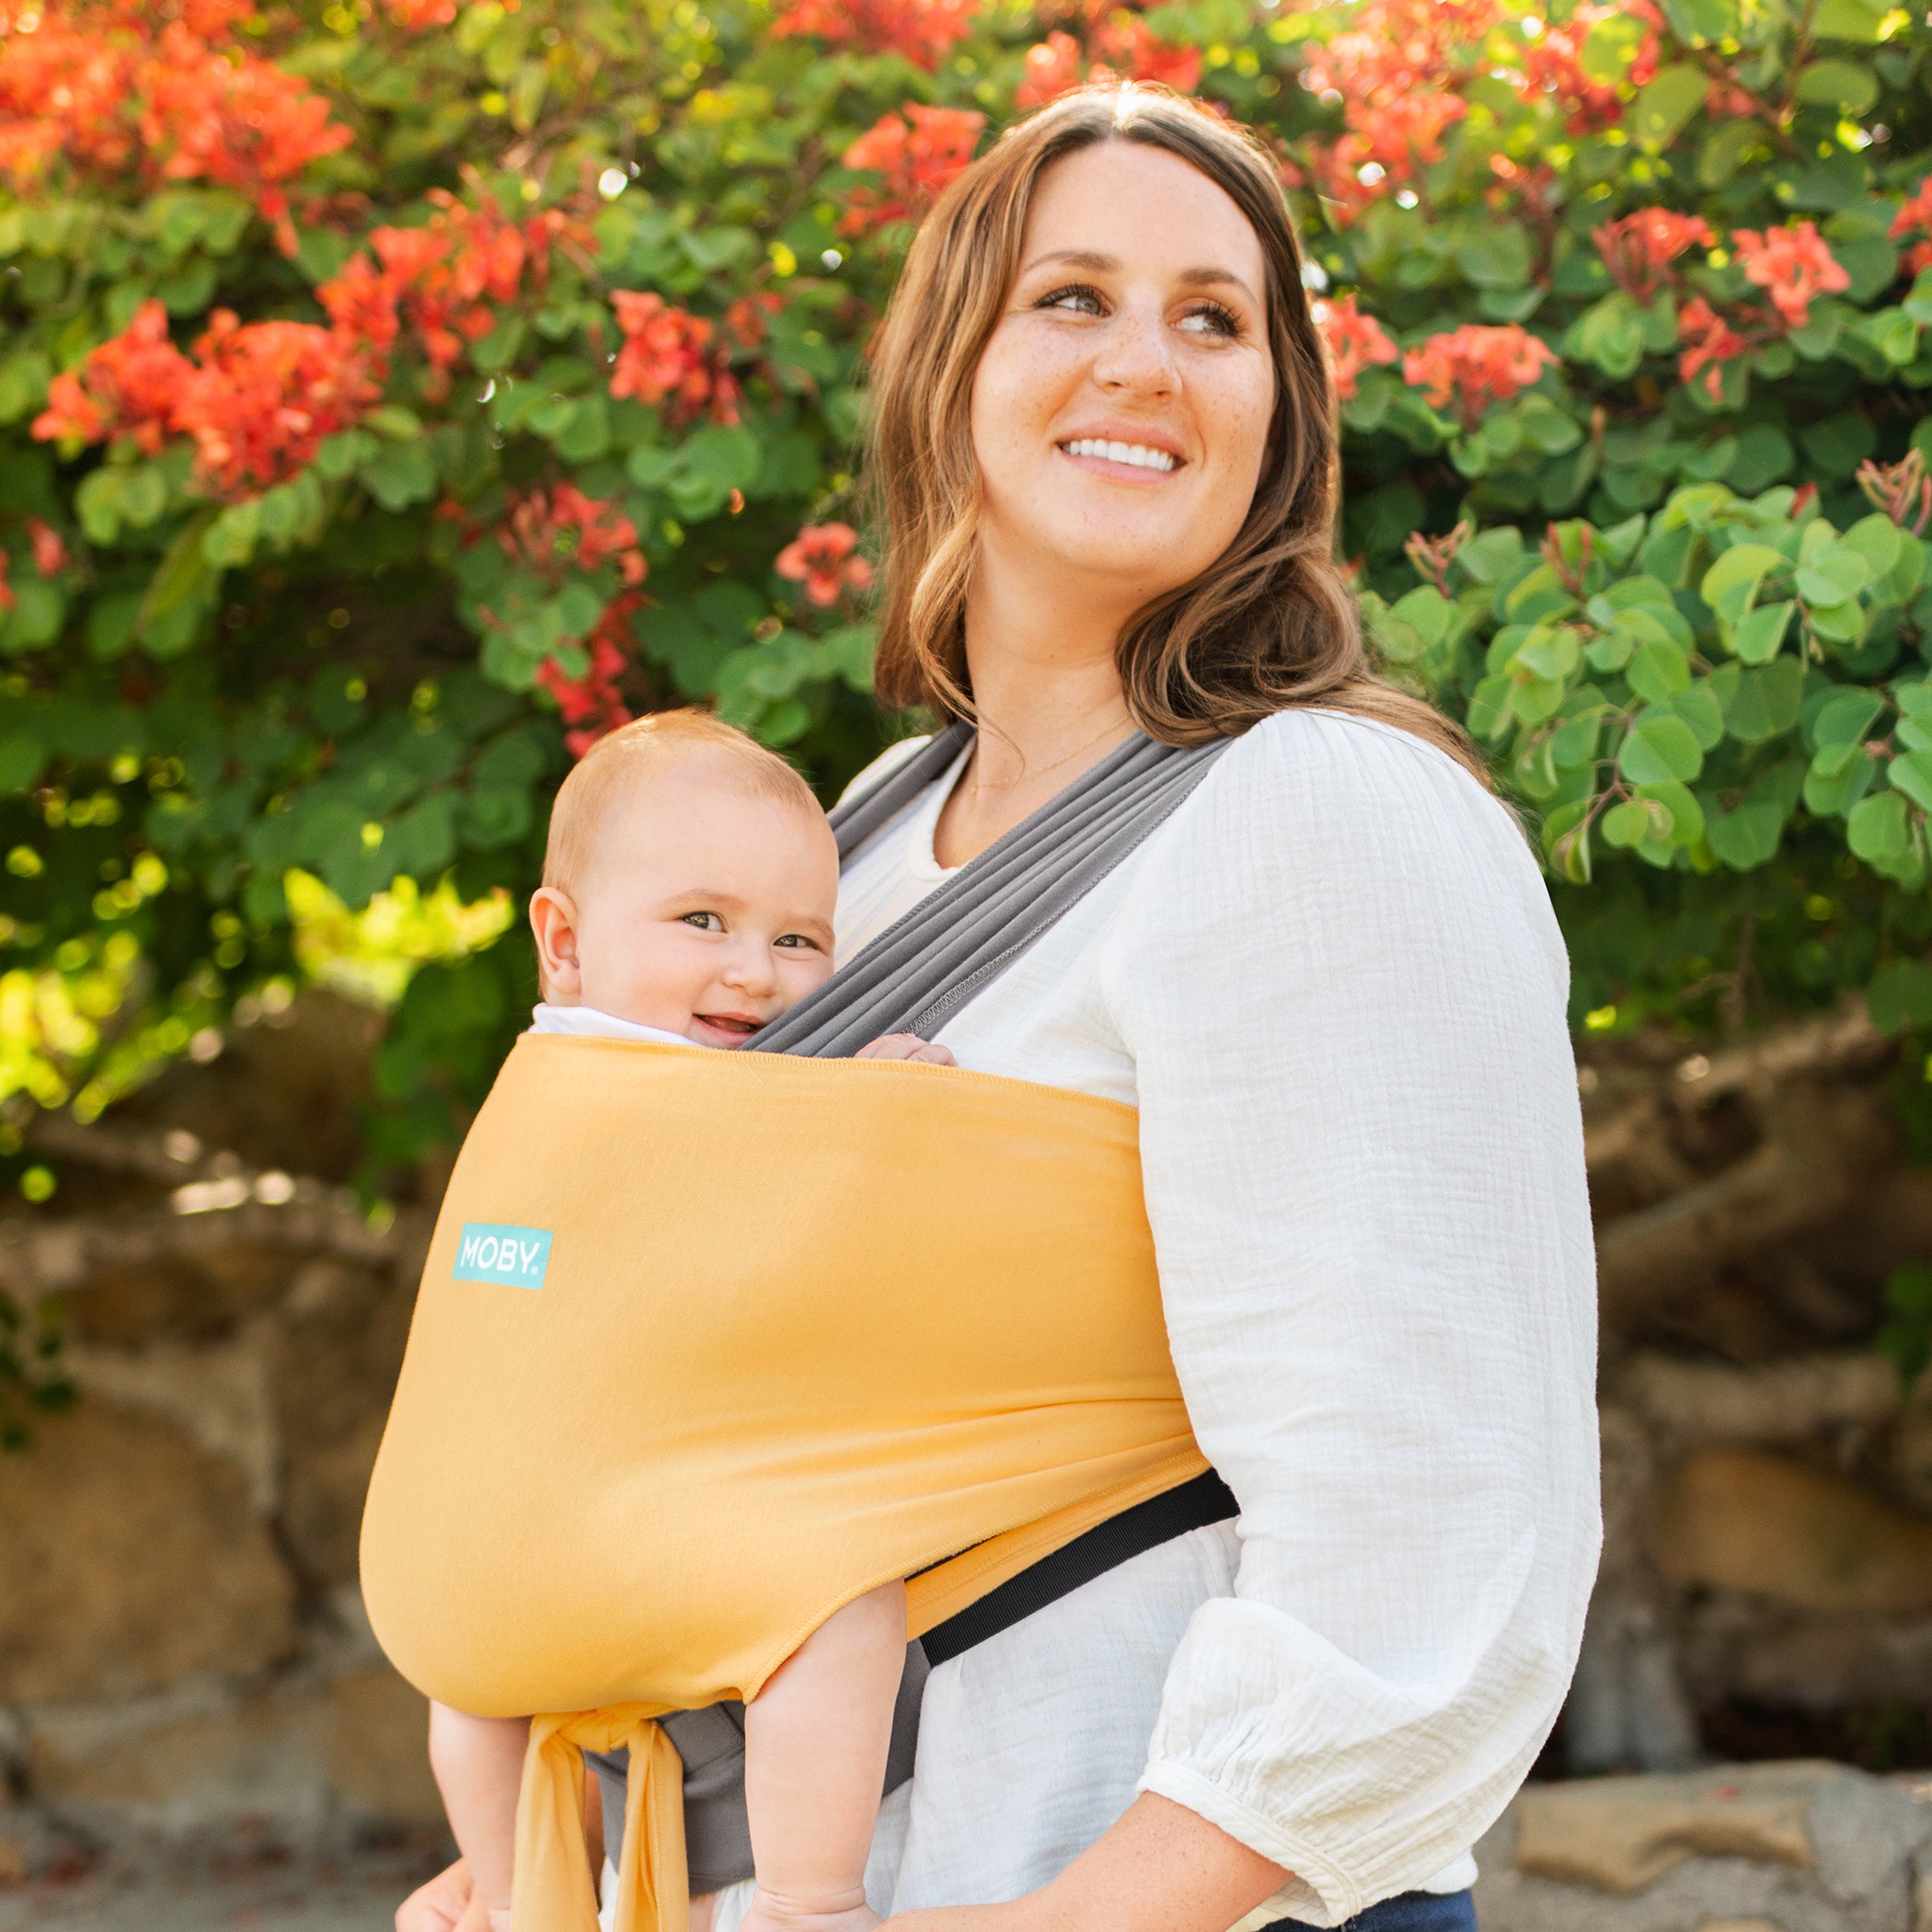 easy-wrap carrier in marigold perfect for plus size moms and babies of all sizes